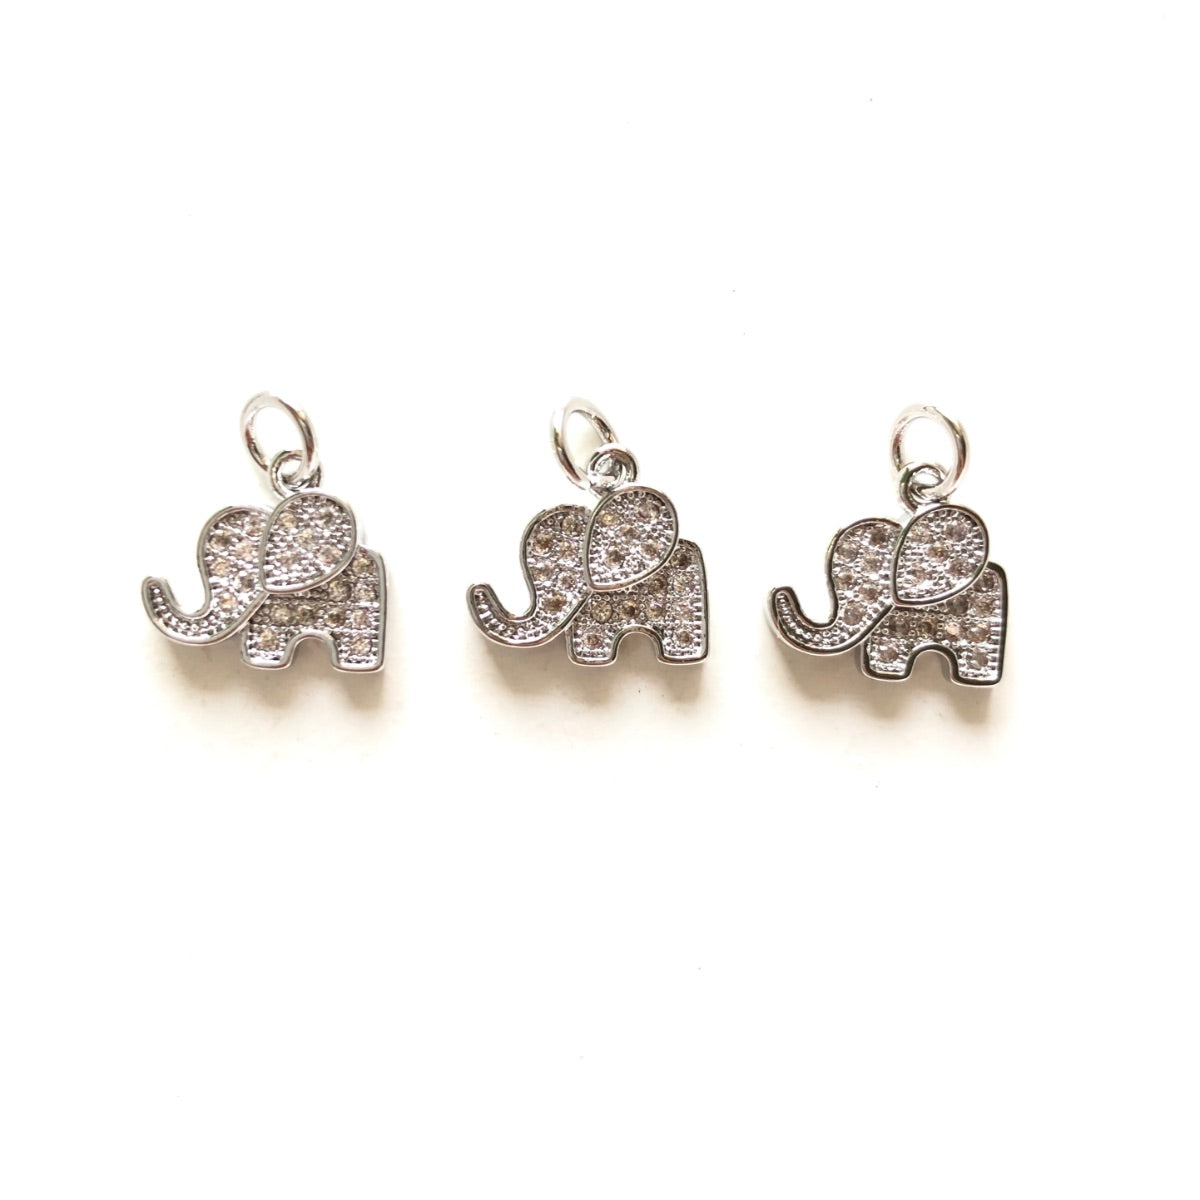 10pcs/lot 12*11mm Small Size CZ Pave Elephant Charms Silver CZ Paved Charms Animals & Insects Small Sizes Charms Beads Beyond